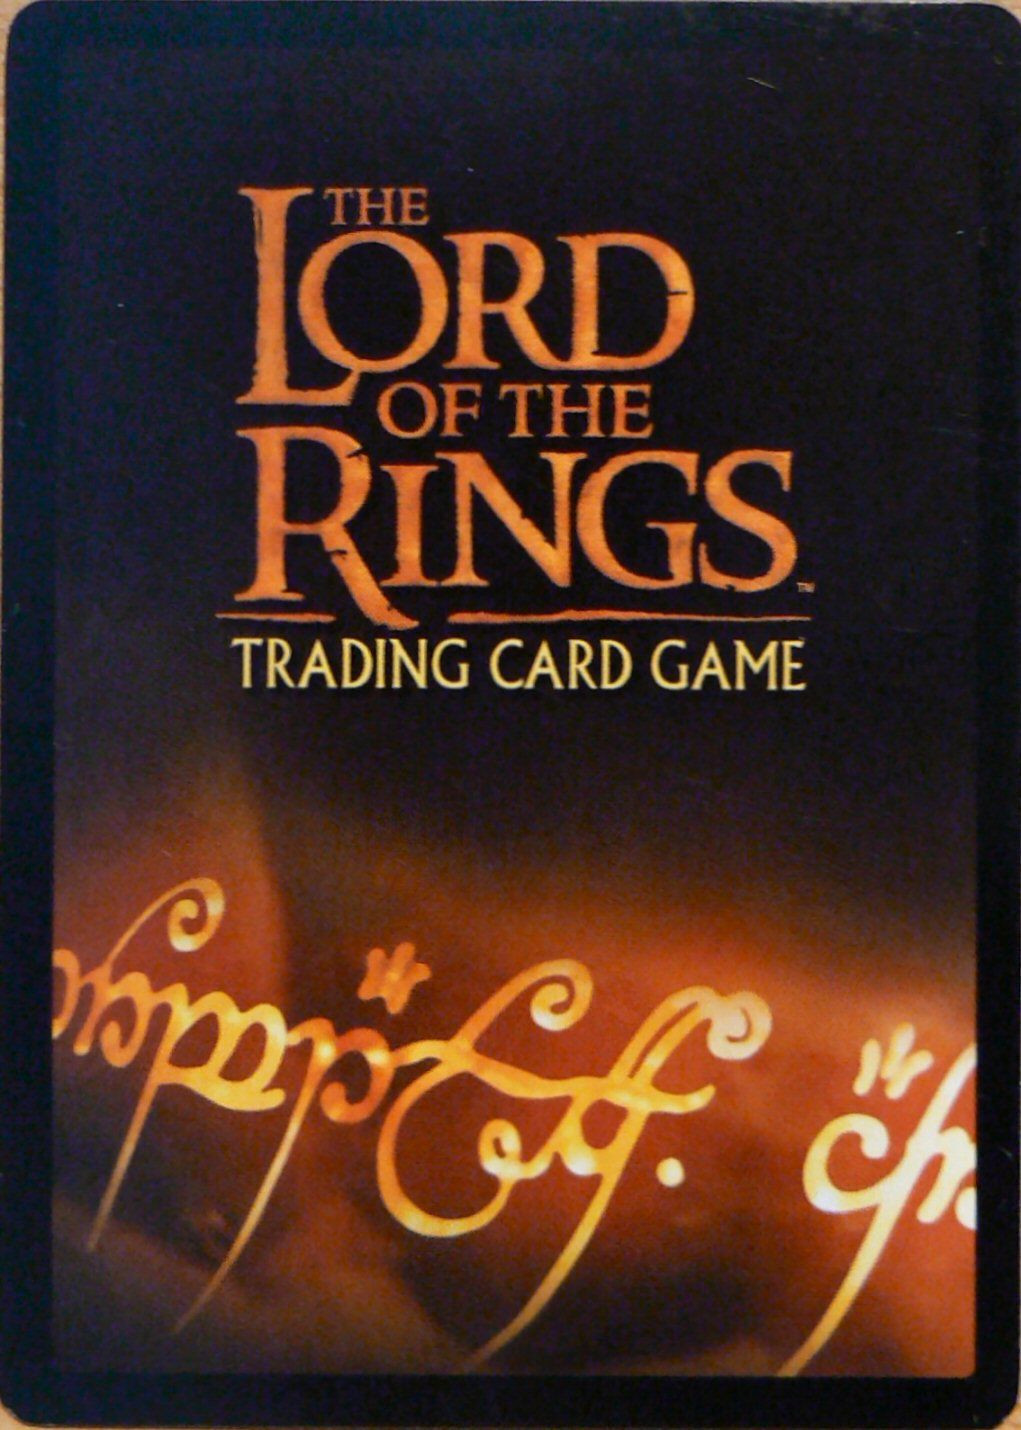 The Lord of the Rings Trading Card Game